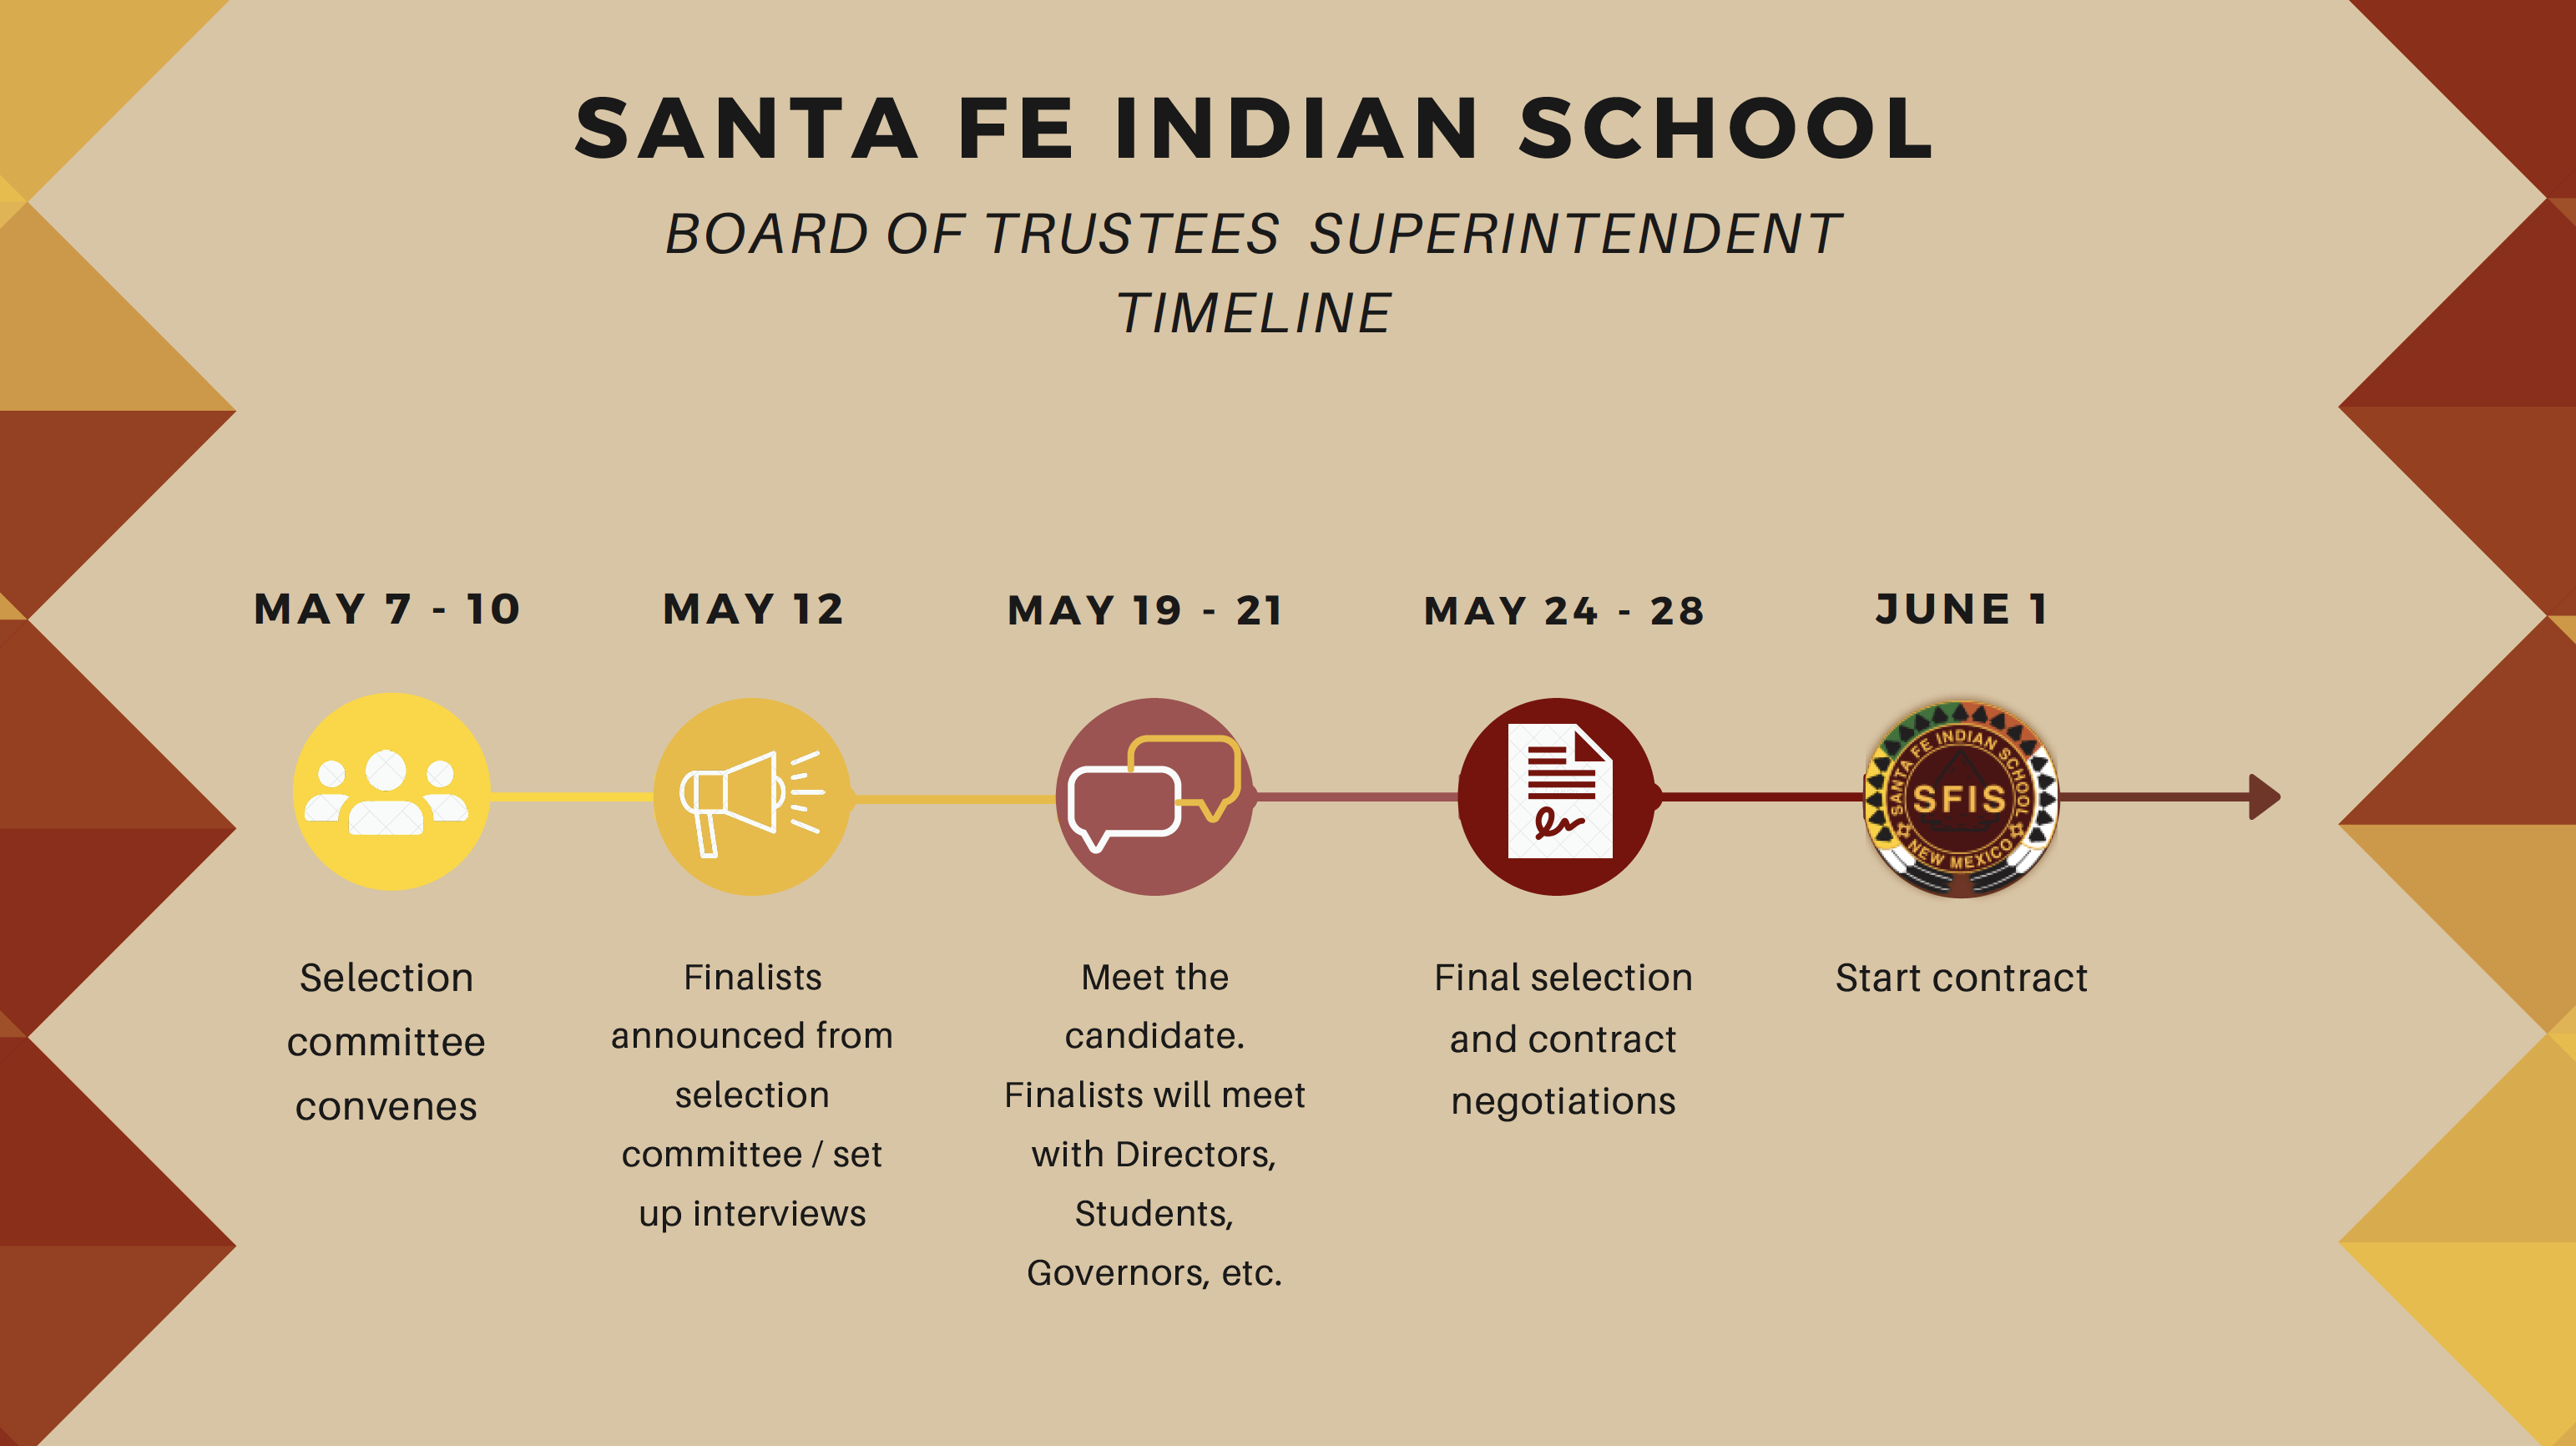 Superintendent Search Timeline